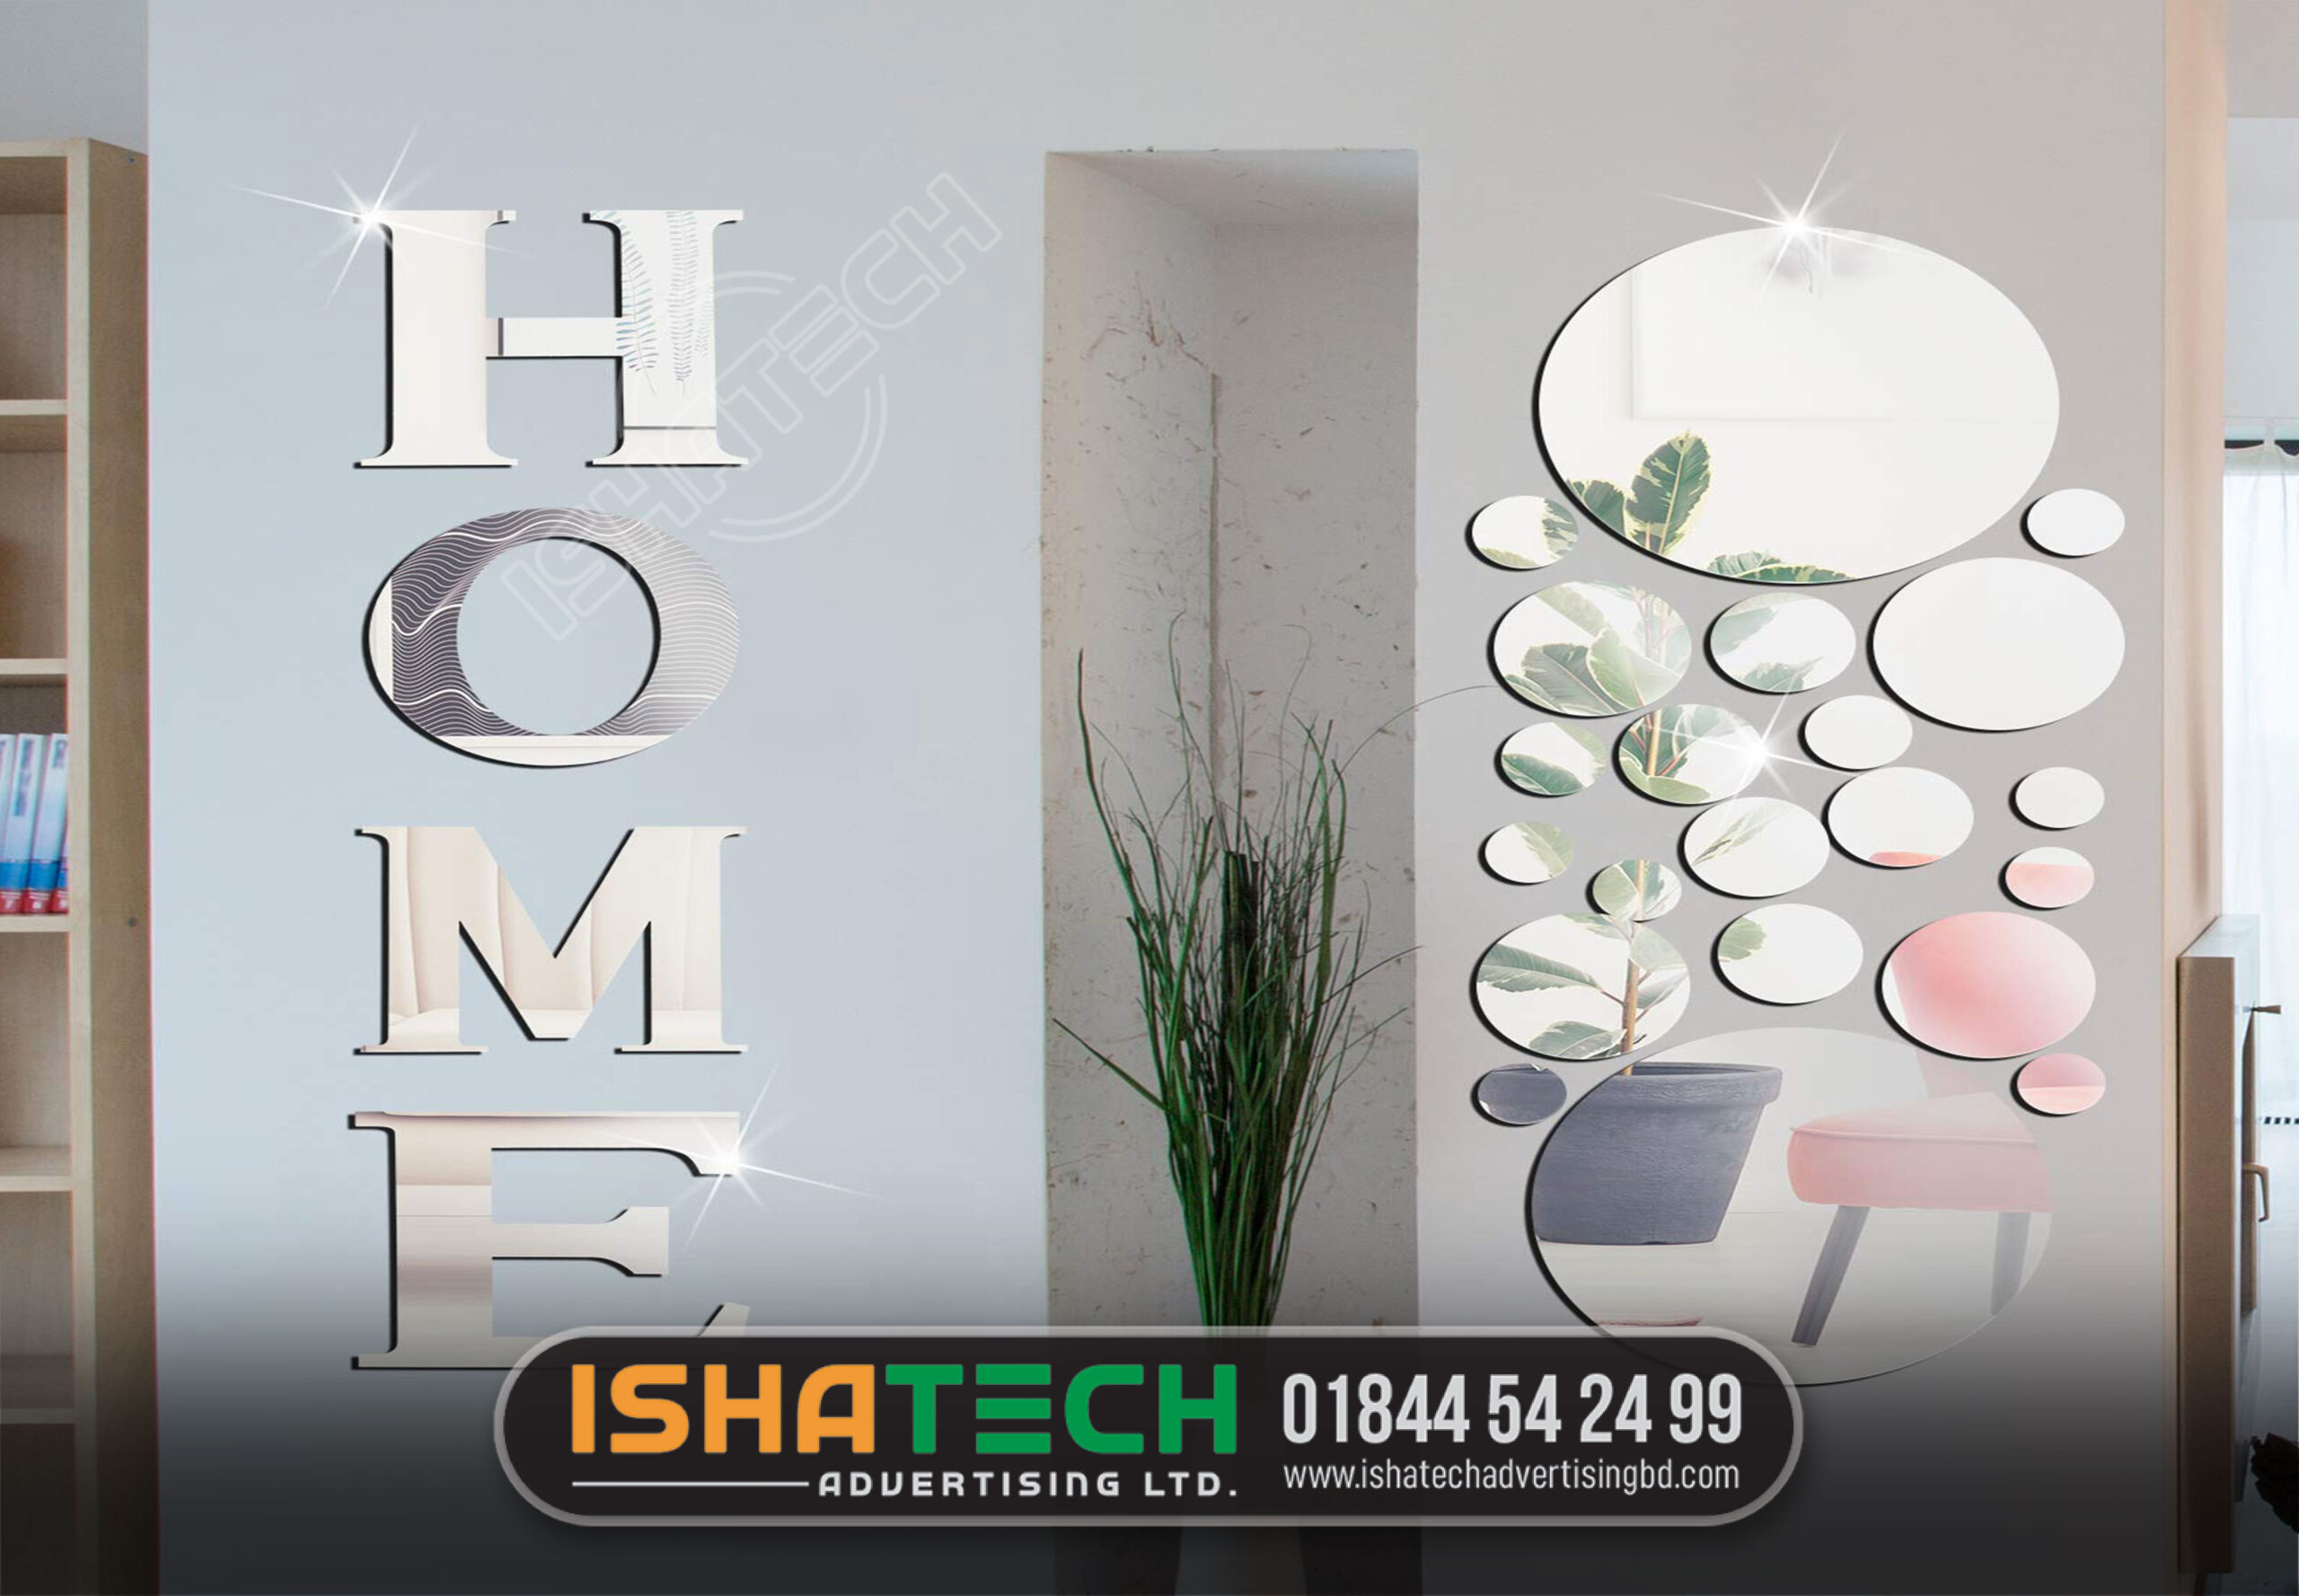 Home decor by mirror letter making dhaka bangladesh price. Home decor by mirror letter making dhaka bangladesh online shopping. Home decor by mirror letter making dhaka bangladesh online. home decor mirror. price of mirror glass in bd. smart mirror price in bangladesh.